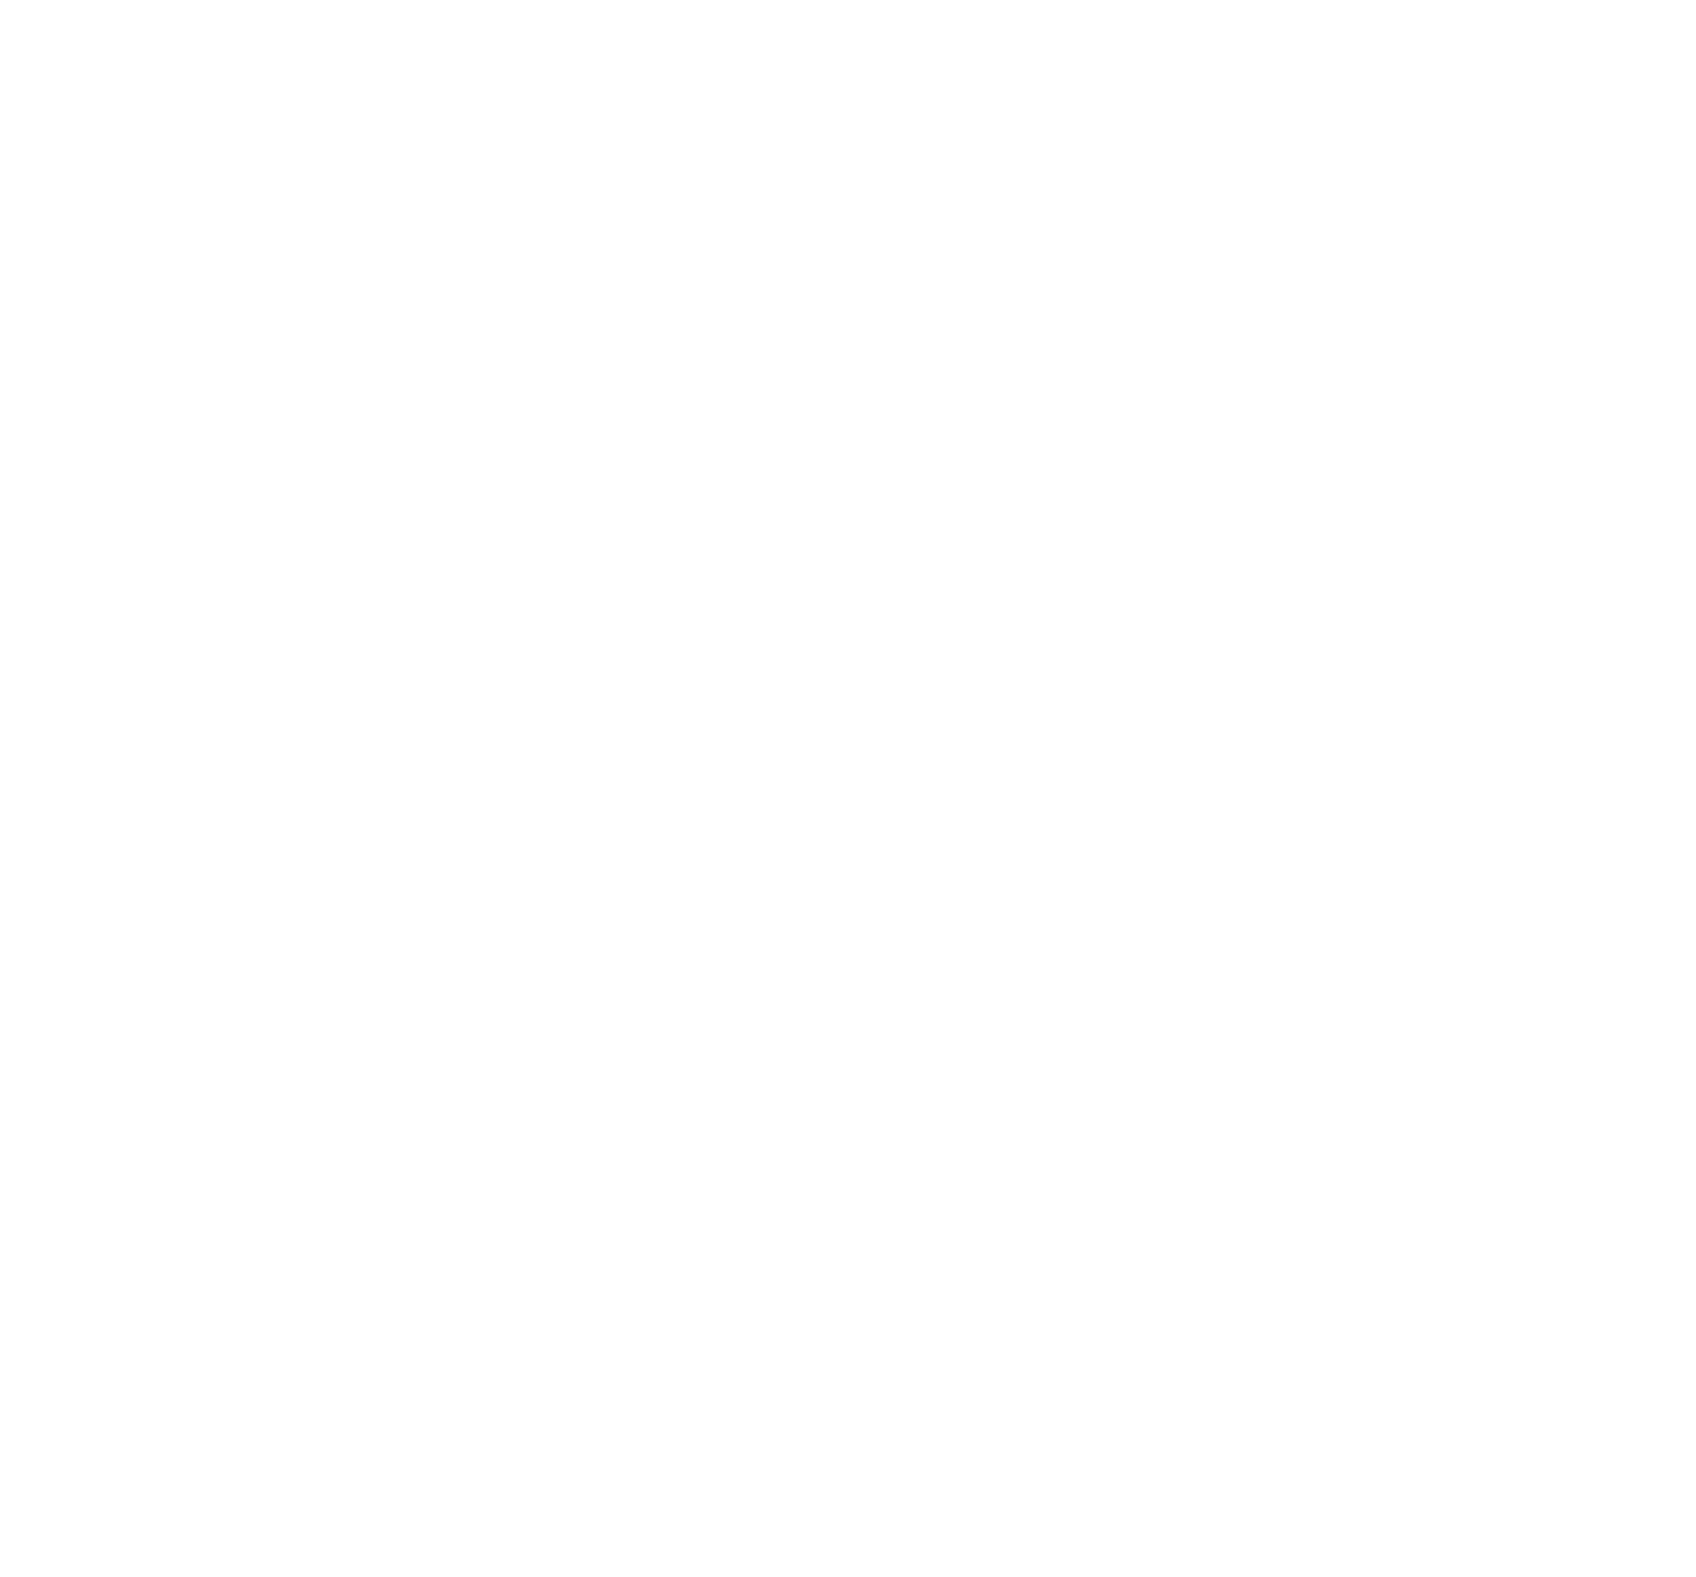 The Association of Finnish Architects’ Offices